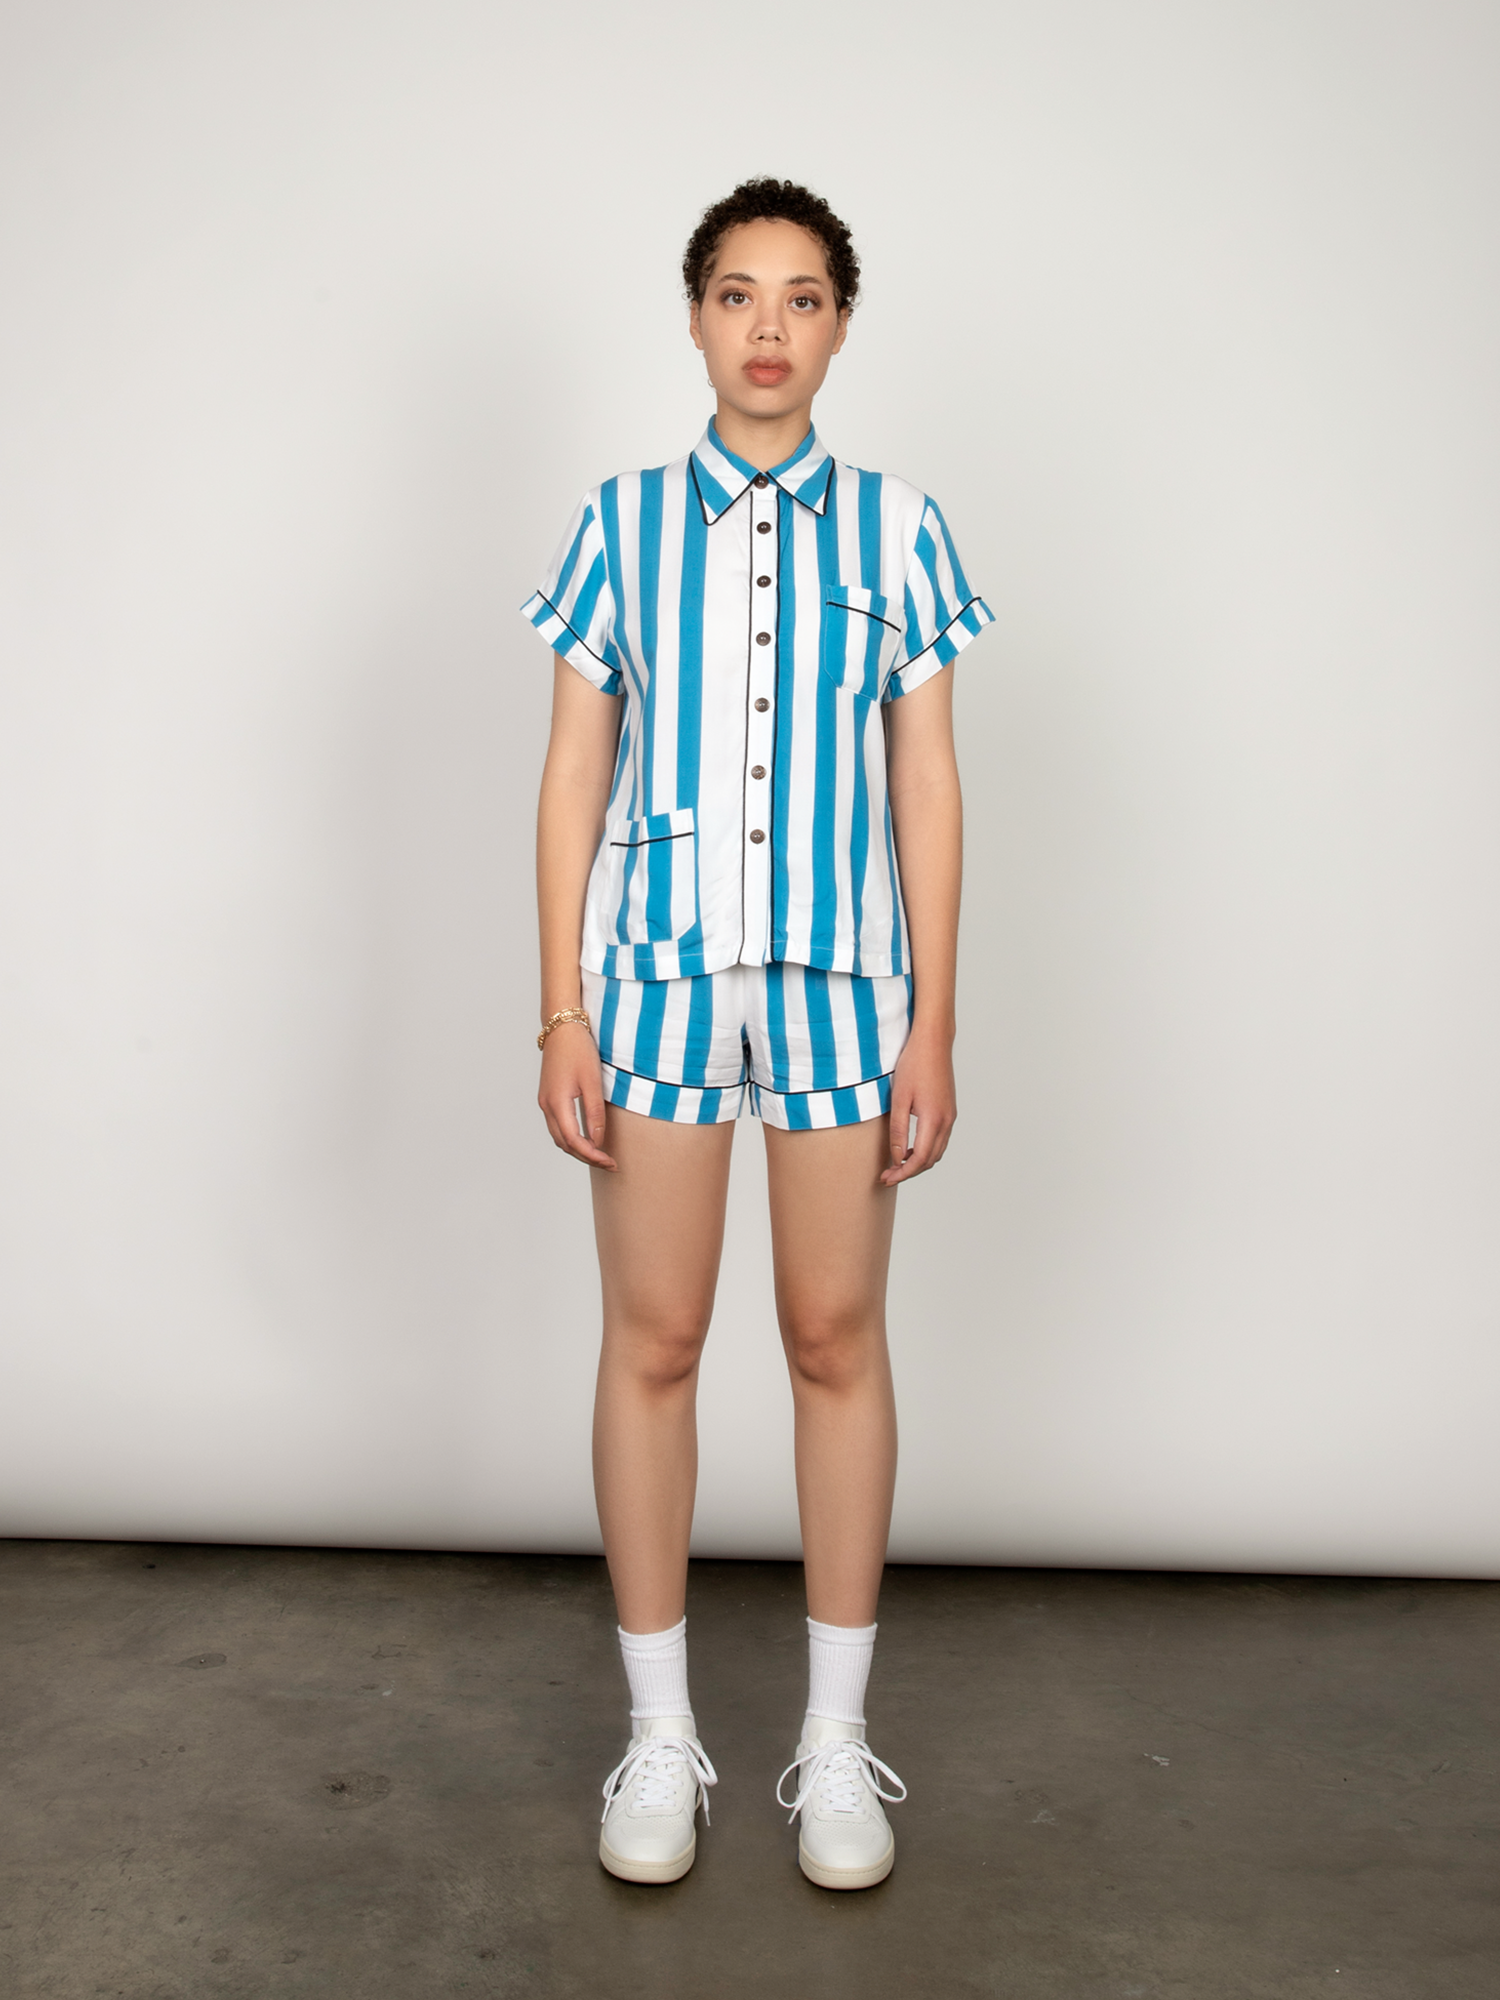 Blue and white striped short-sleeve pajama shirt with contrasting black piping.